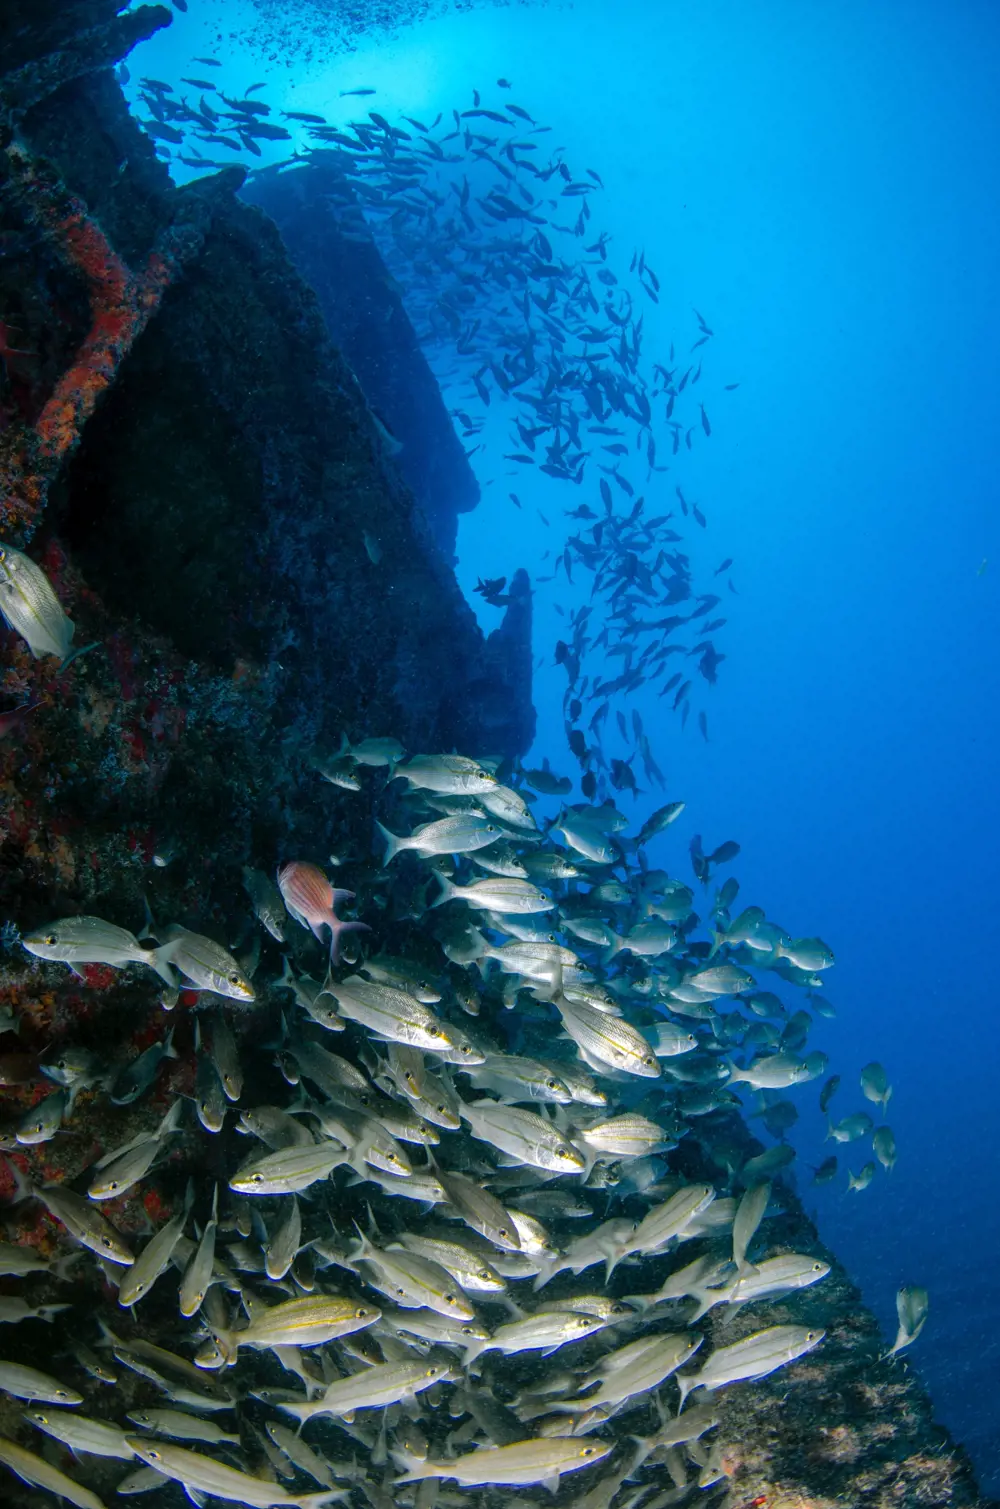 A shoal of silver fish swimming around a shipwreck that has become an artificial reef.